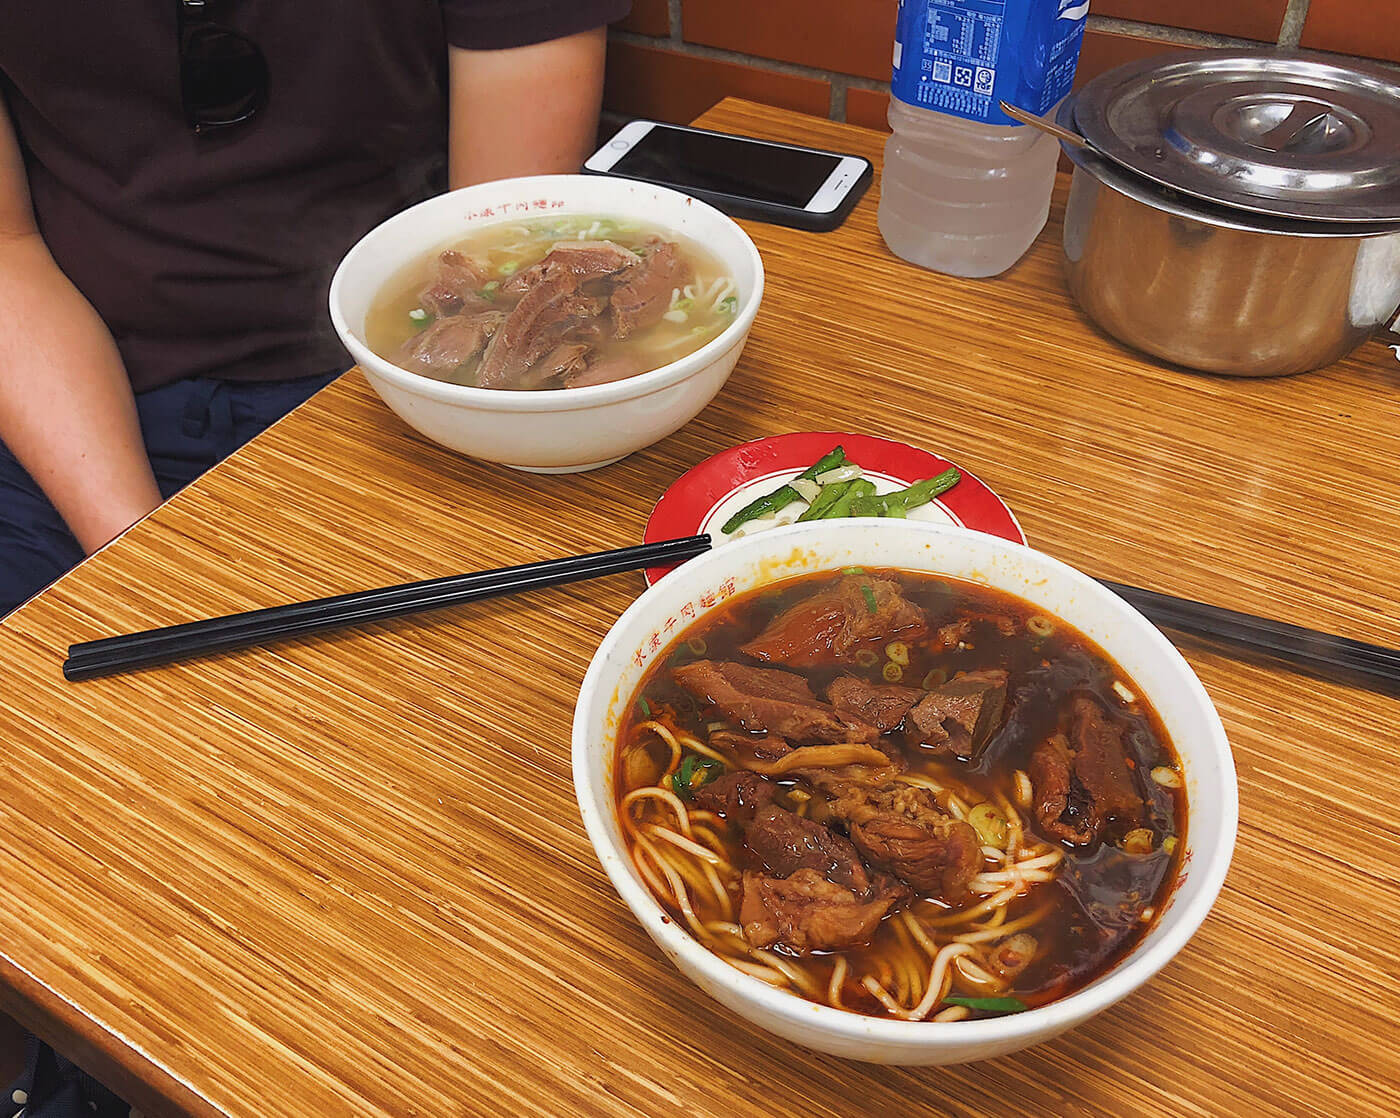 Two styles of broth at Yong Kang Beef Noodle